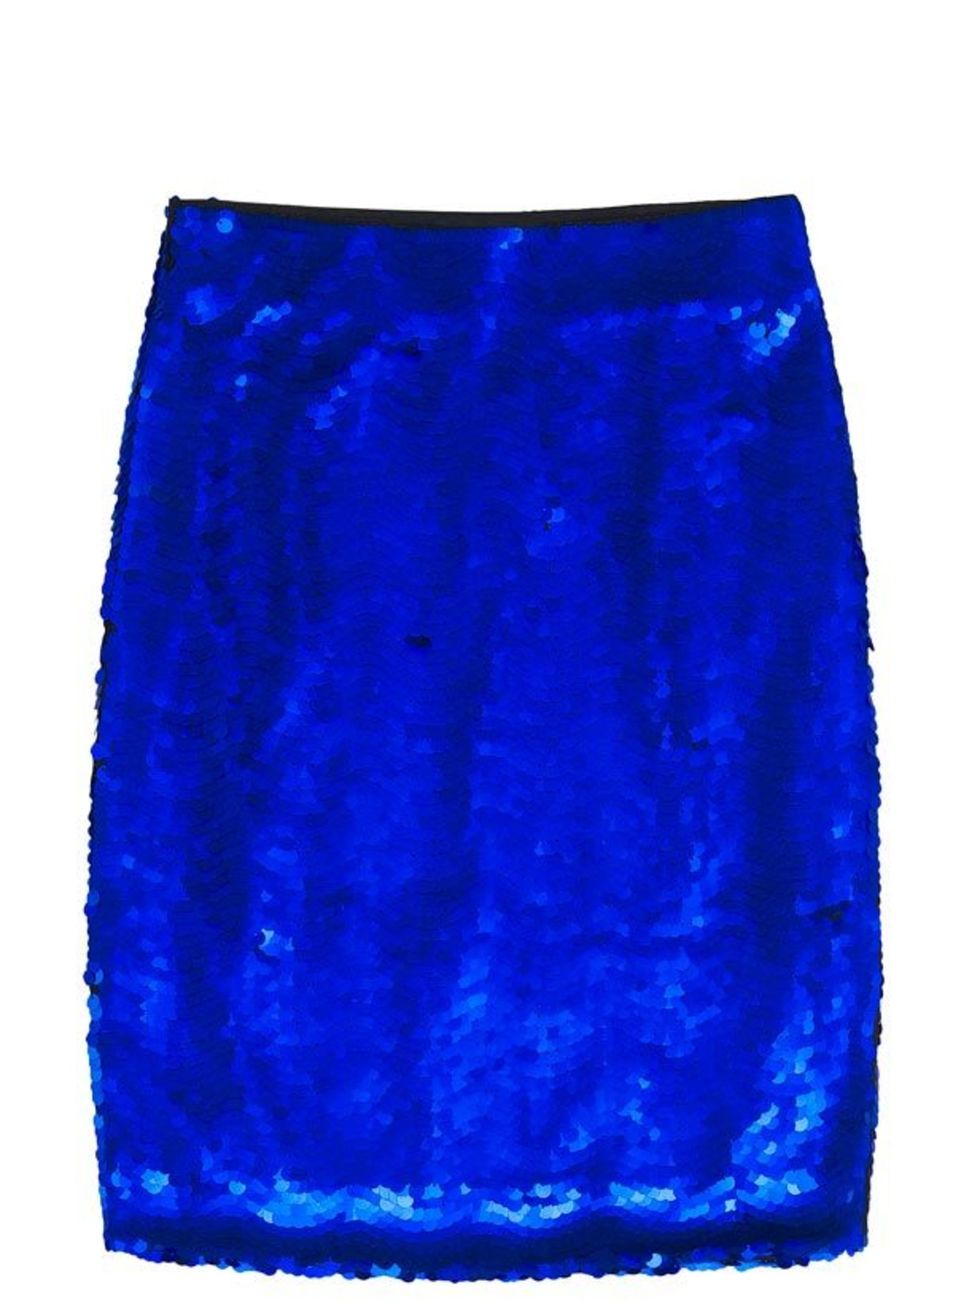 <p>If you buy just one item this season, make it a pencil skirt. And this Zara version has the added bonus of ticking off the sequin trend <a href="http://www.zara.com/webapp/wcs/stores/servlet/product/uk/en/zara-W2011/122009/554001/SEQUINNED%2BSKIRT">Za